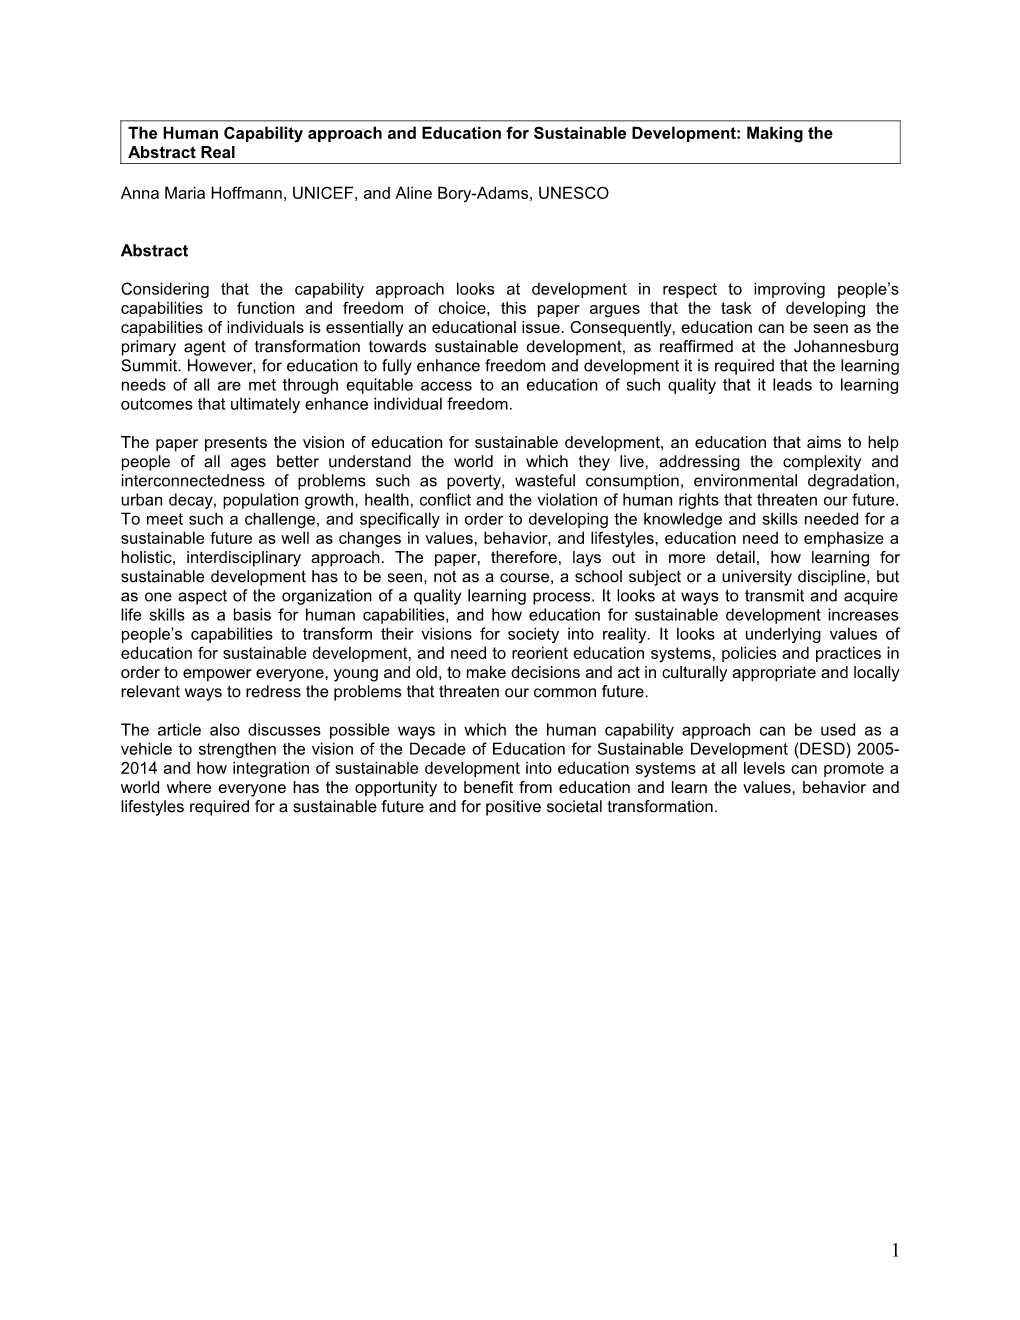 The Human Capability Approach And Education For Sustainable Development: Making The Abstract Real